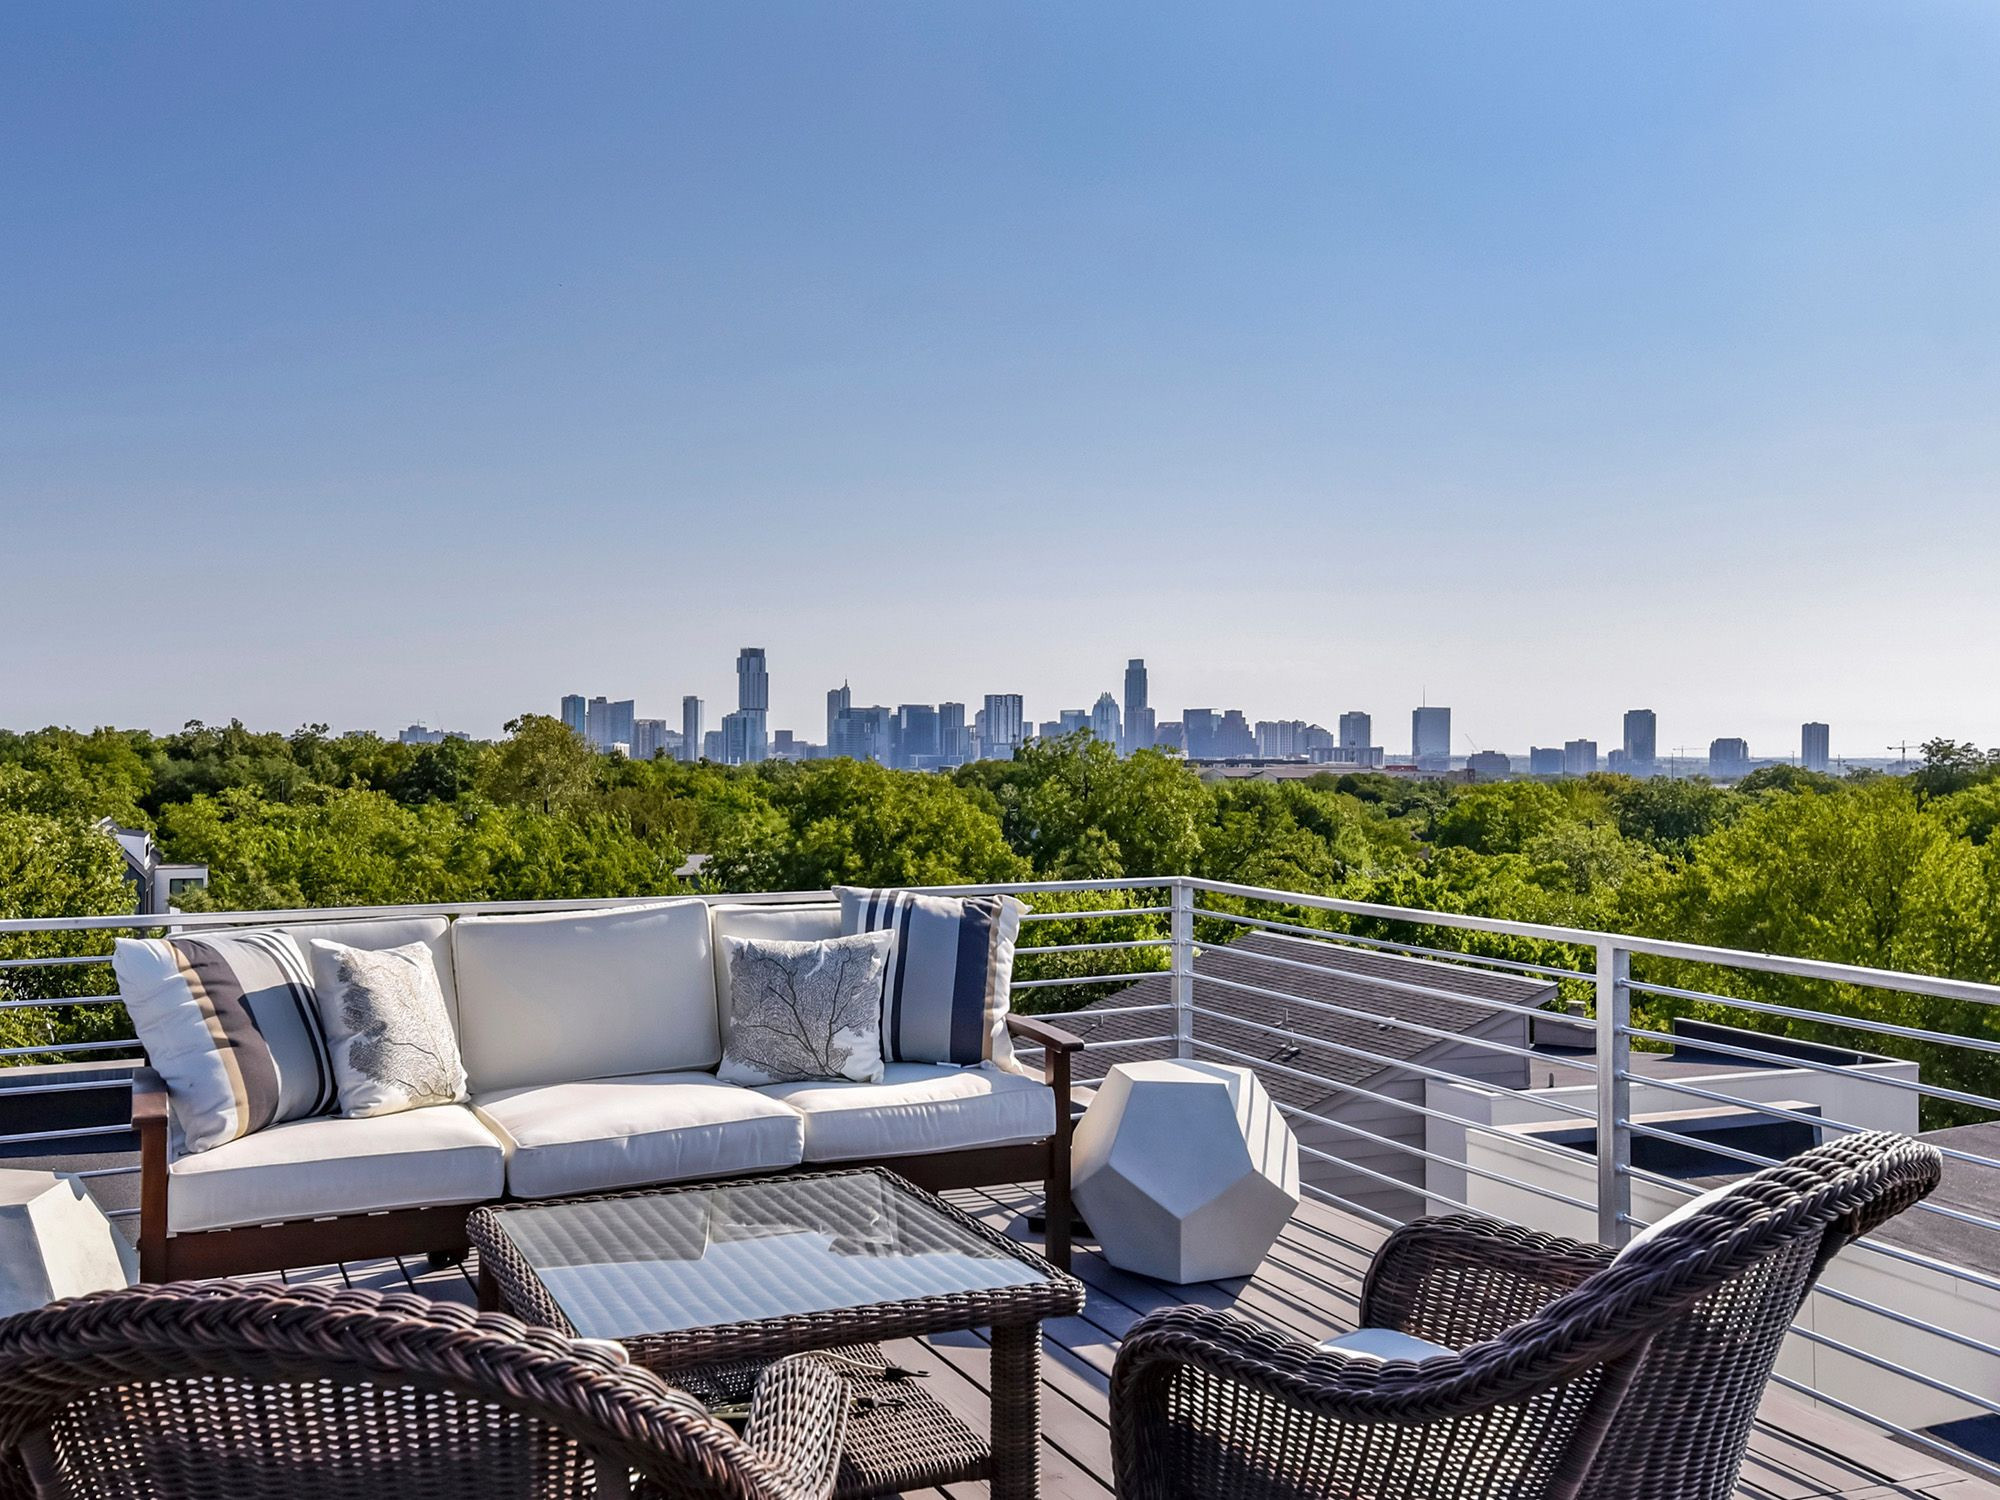 14 Fantastic Hardwood Floor Installation Austin 2024 free download hardwood floor installation austin of enjoy spectacular downtown views from your private roof deck intended for enjoy spectacular downtown views from your private roof deck nestled in the he